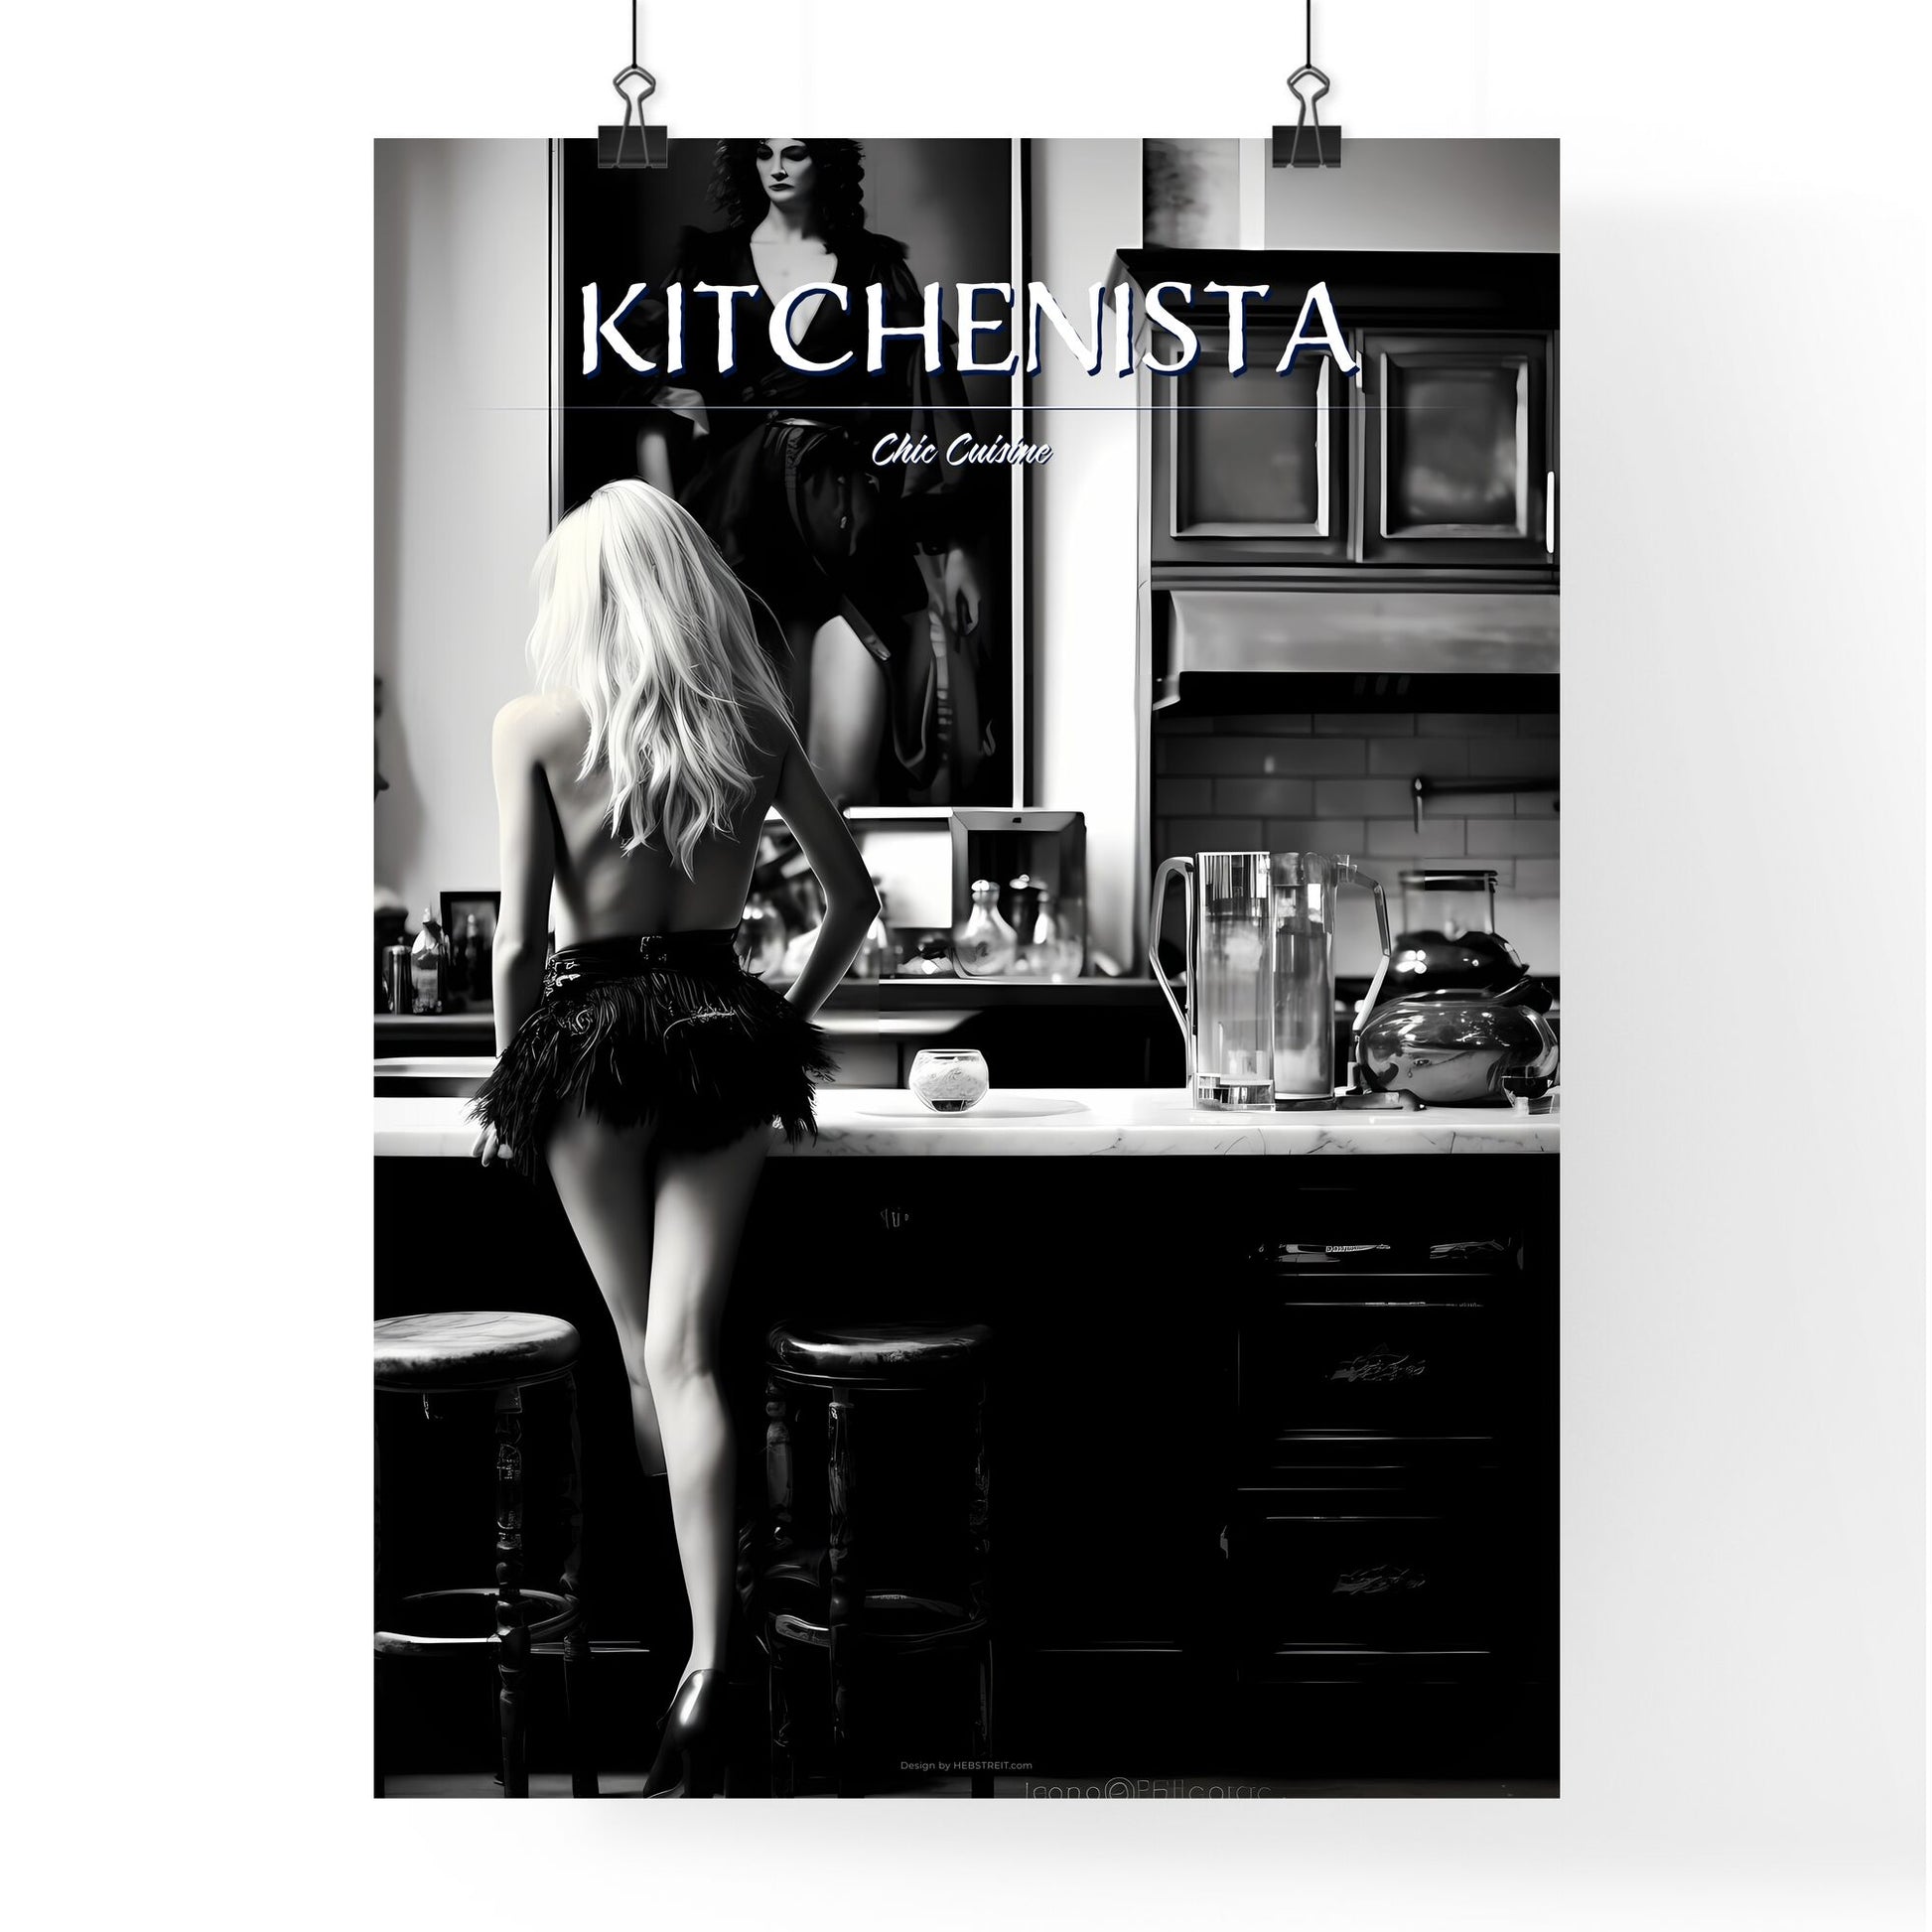 A Poster of leather goddess in a tres chic kitchen - A Woman Standing On A Counter Default Title